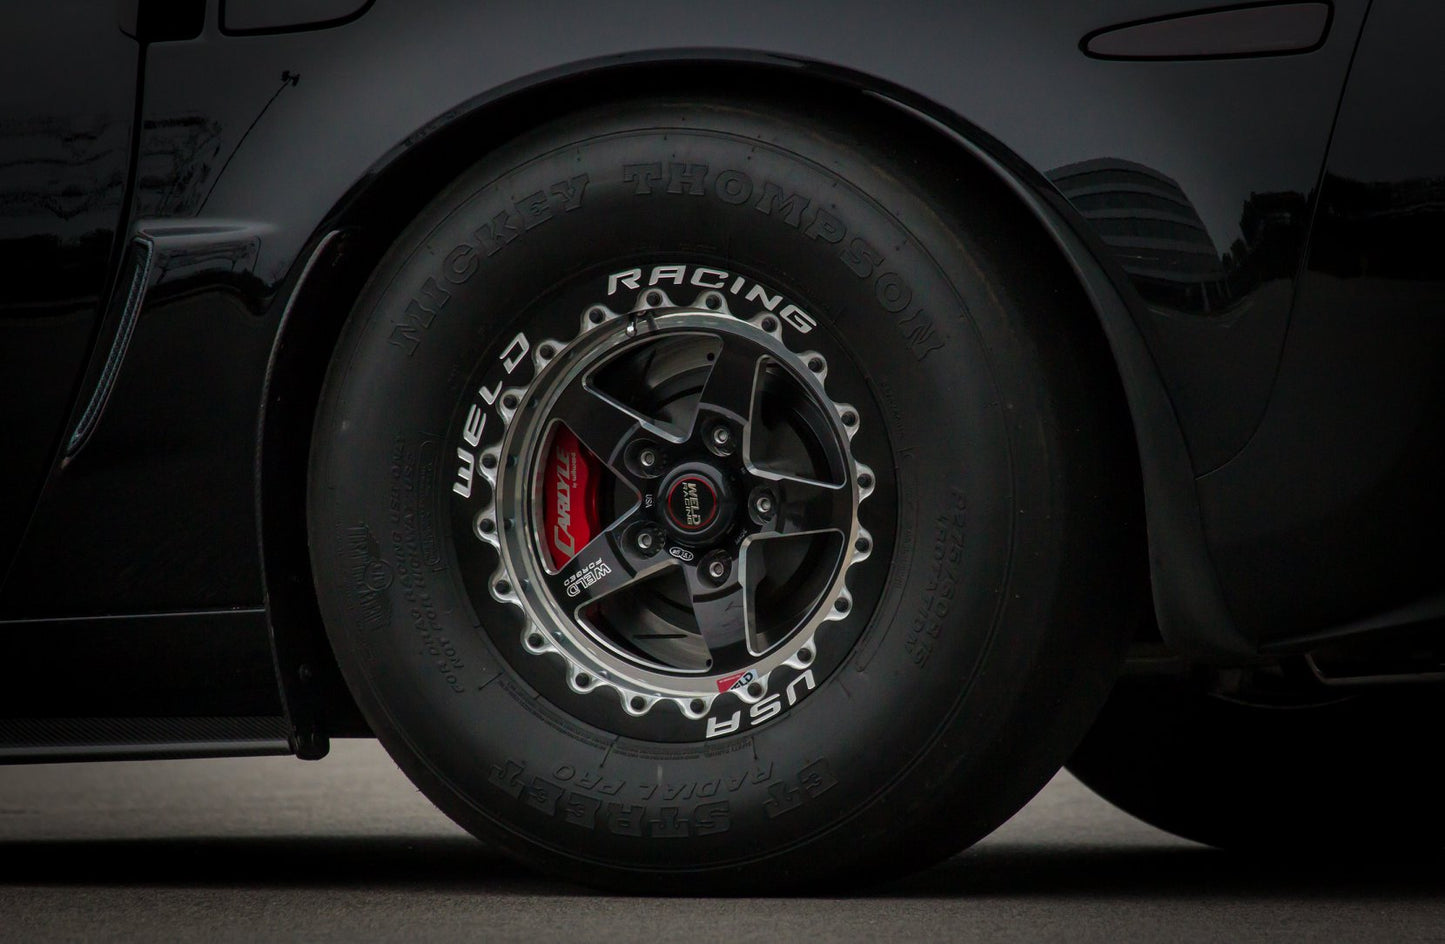 Corvette C5 C6 15" Conversion Kit By Carlyle Racing, Drilled and Slotted Rotors, Red Calipers